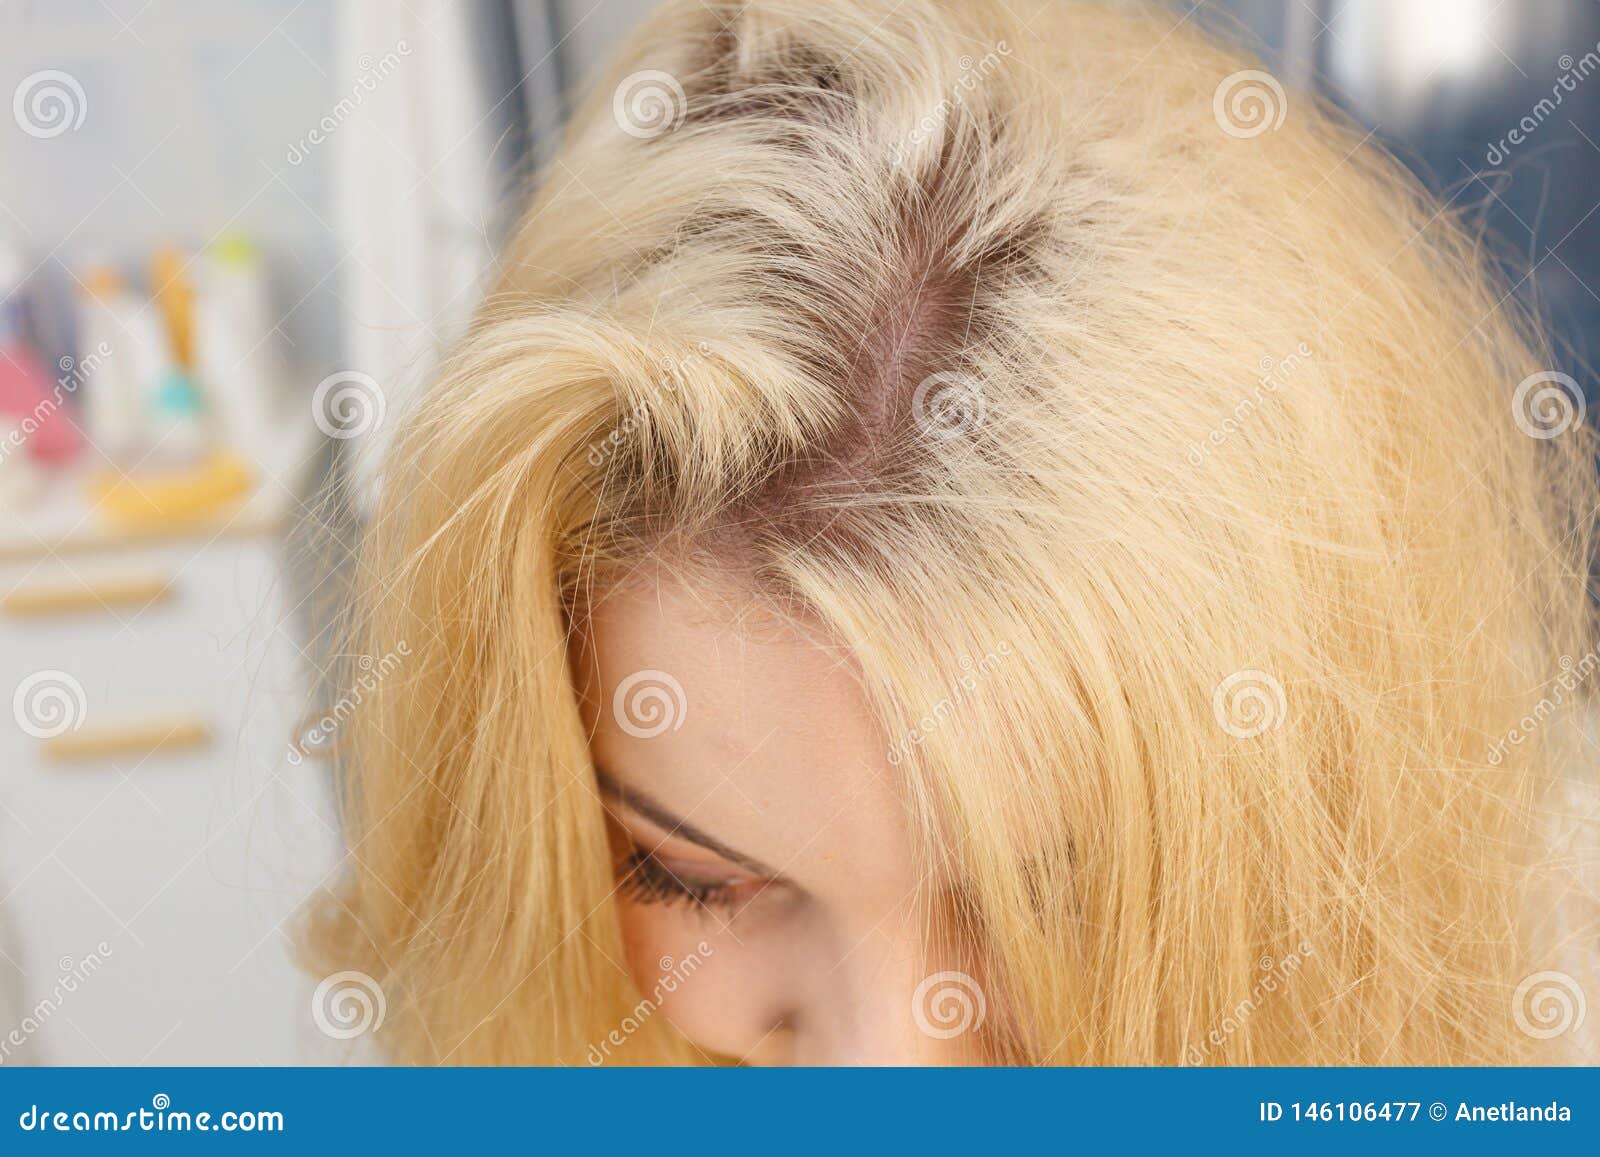 8. How to Prevent Blonde Roots from Showing - wide 2